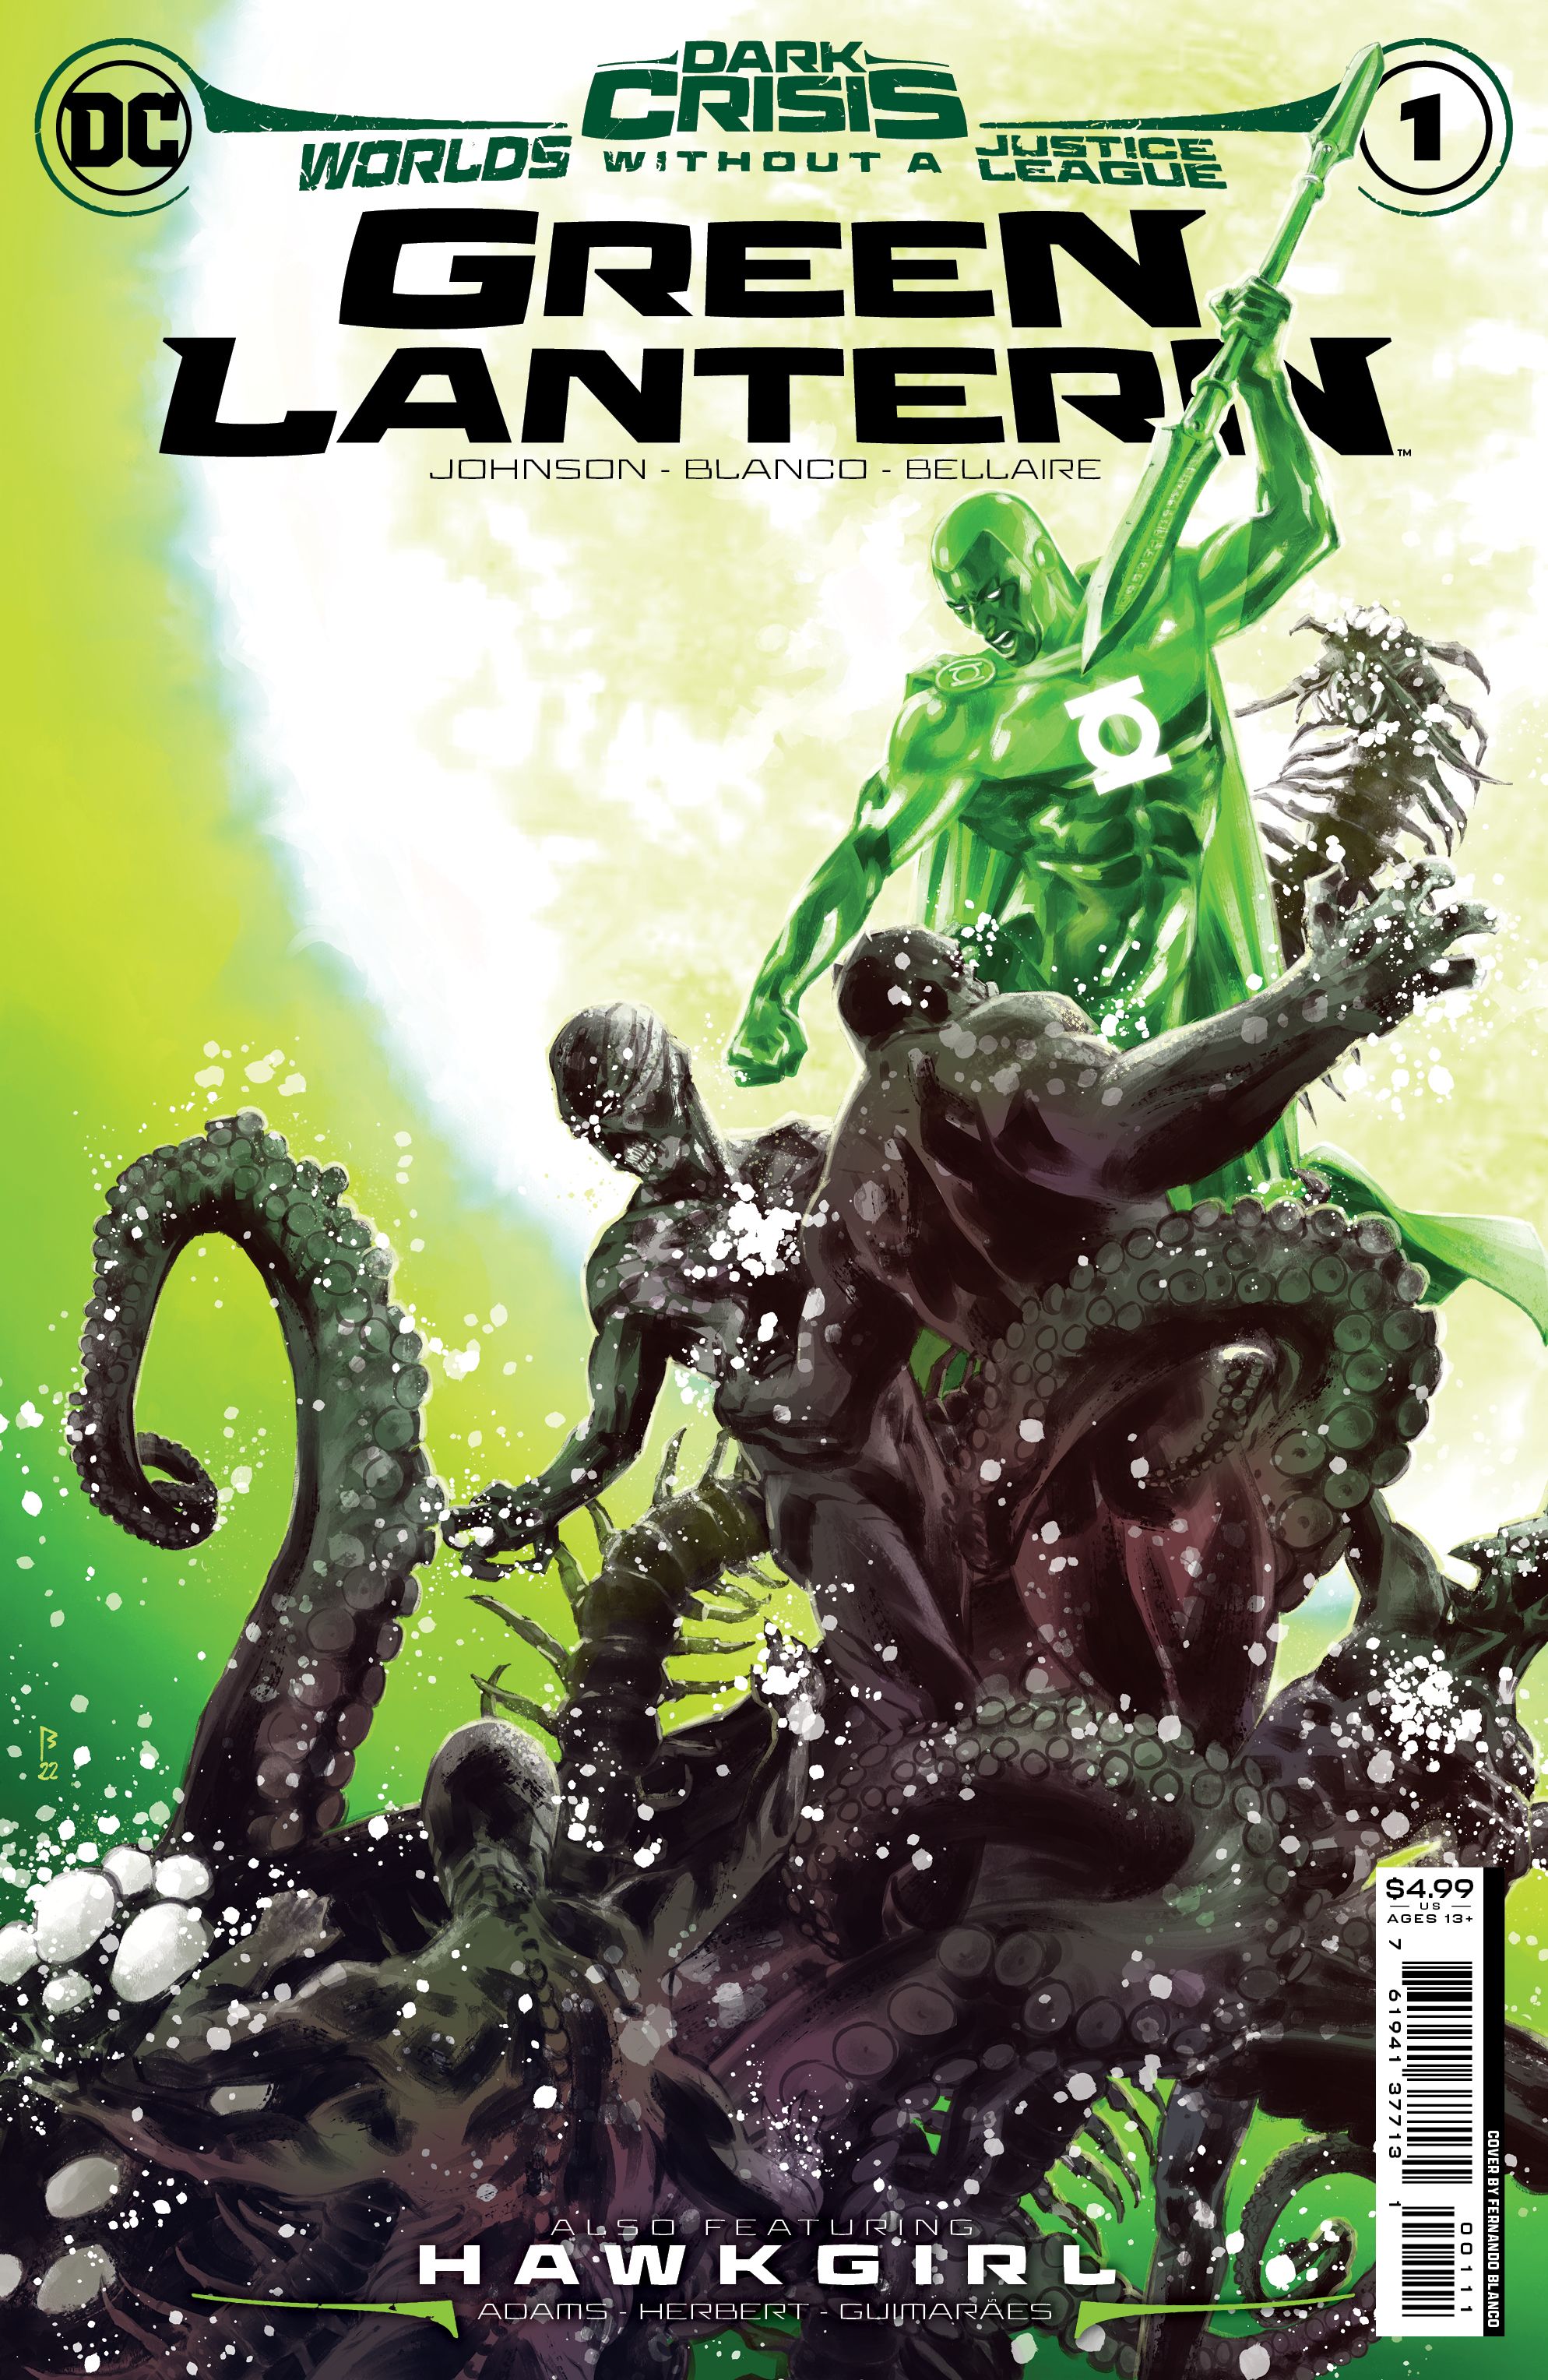 Dark Crisis: Worlds Without a Justice League - Green Lantern Comic